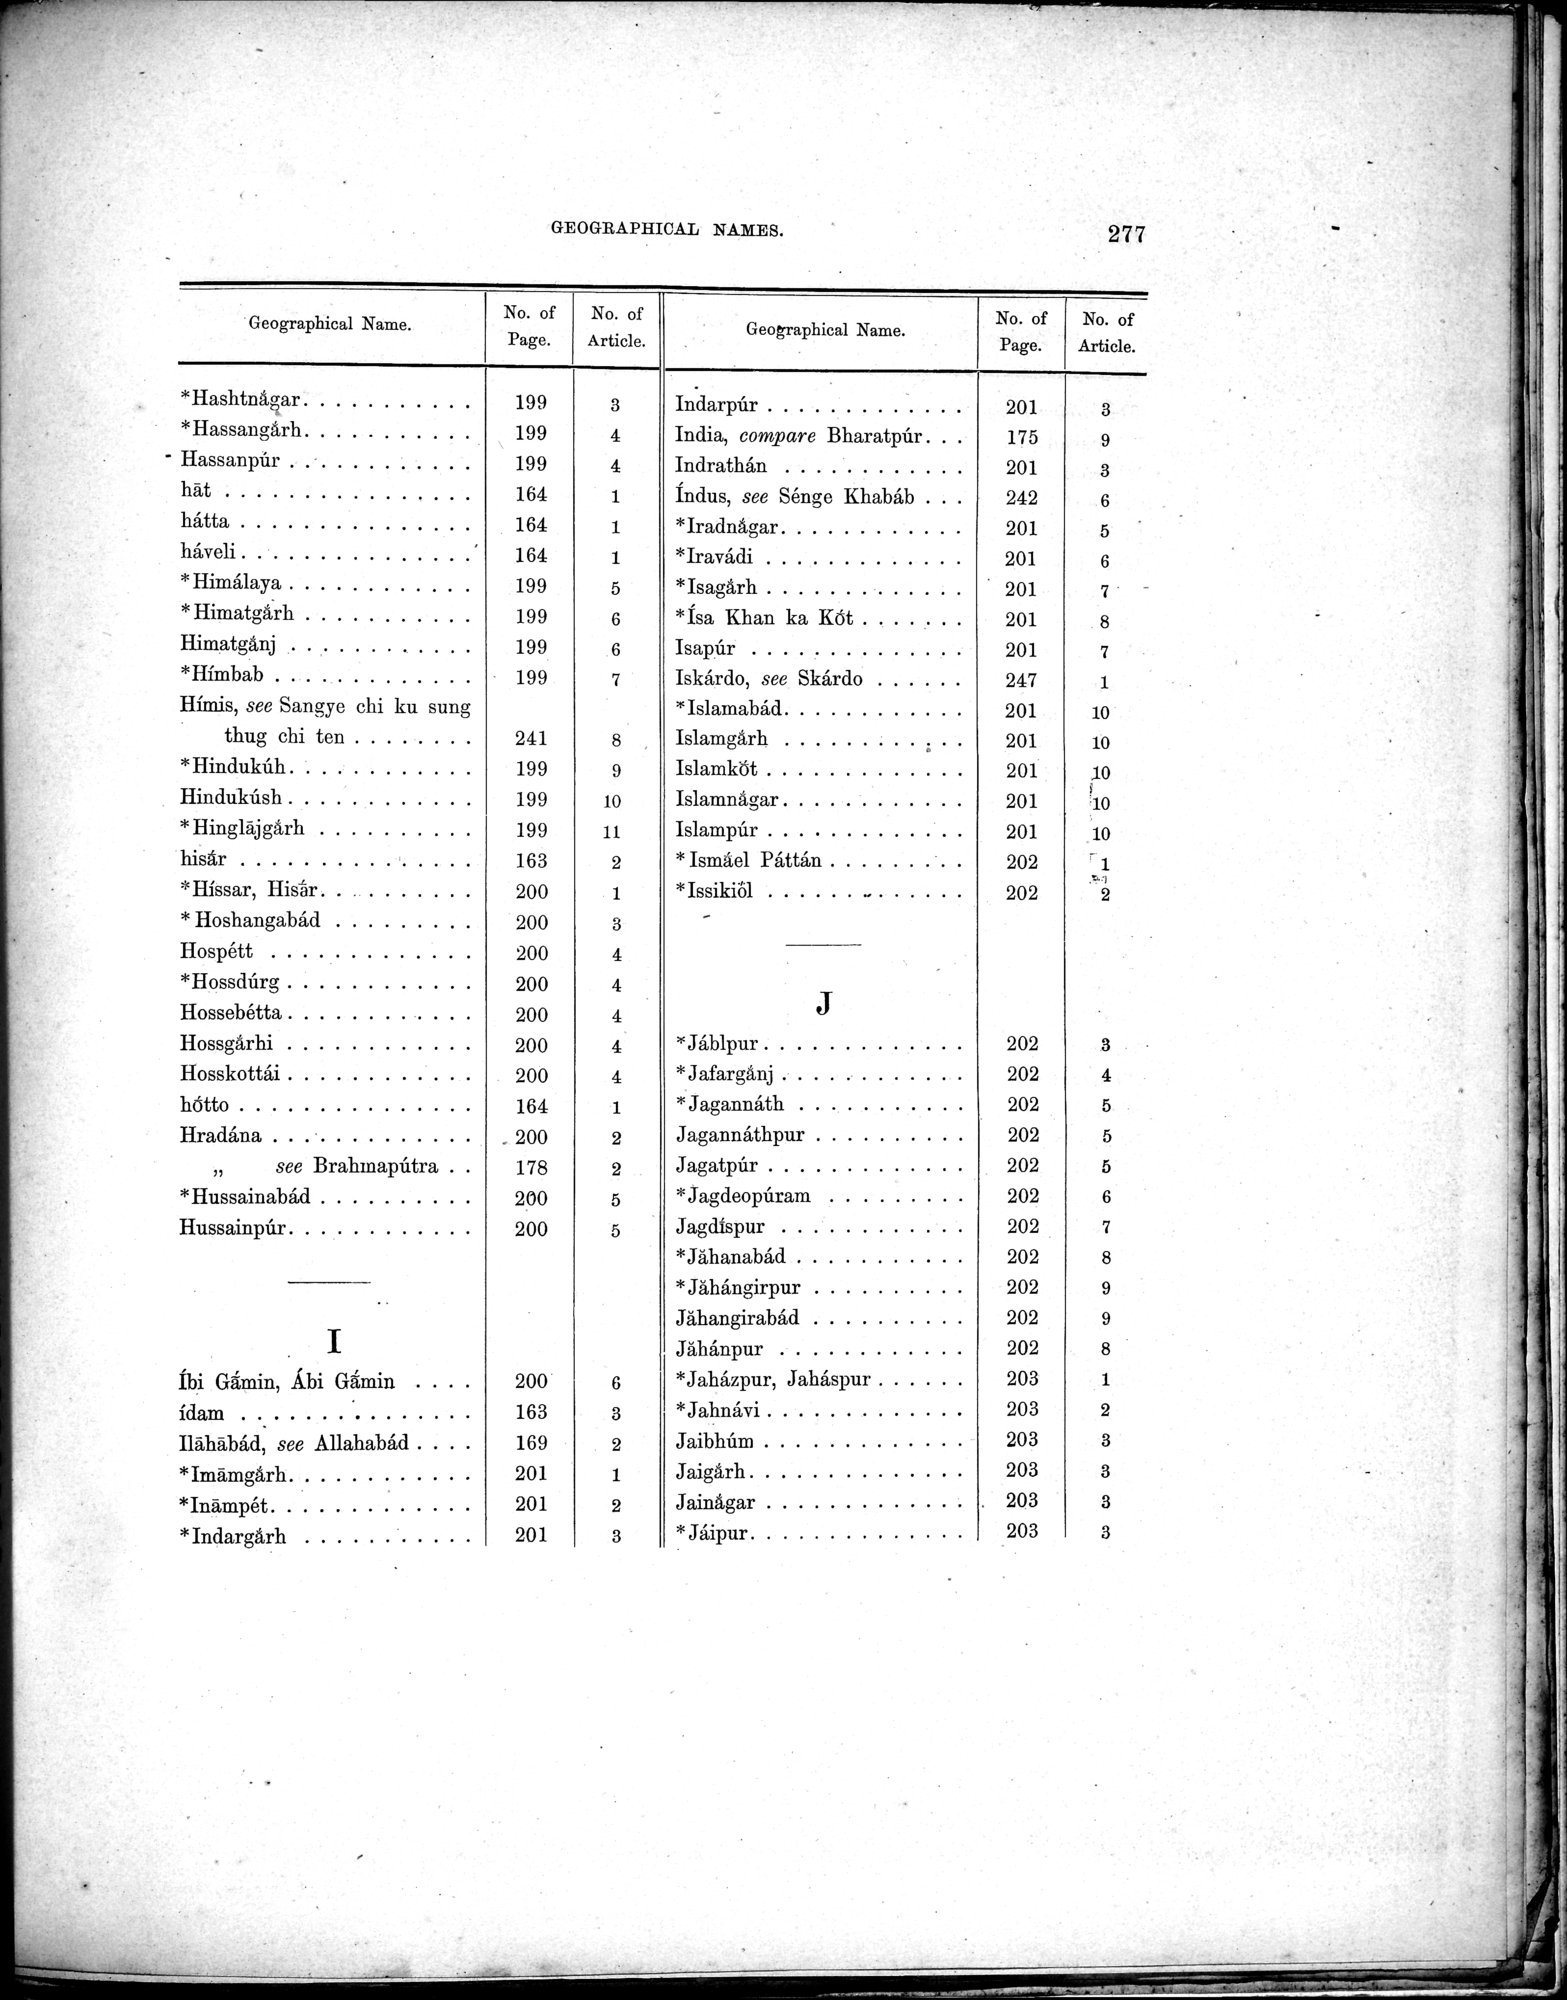 Results of a Scientific Mission to India and High Asia : vol.3 / Page 309 (Grayscale High Resolution Image)